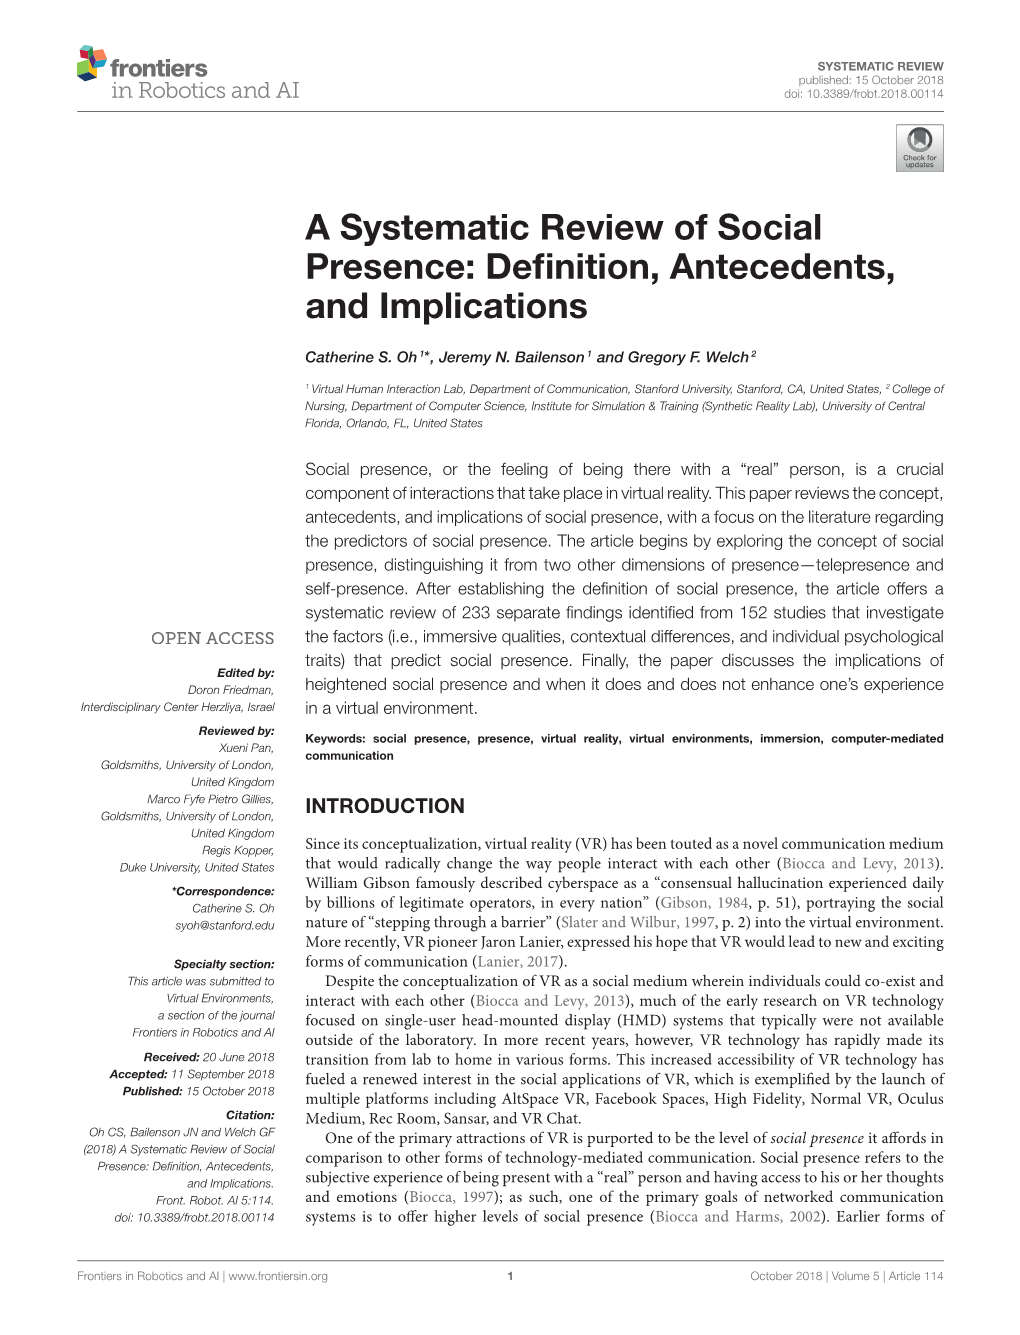 A Systematic Review of Social Presence: Definition, Antecedents